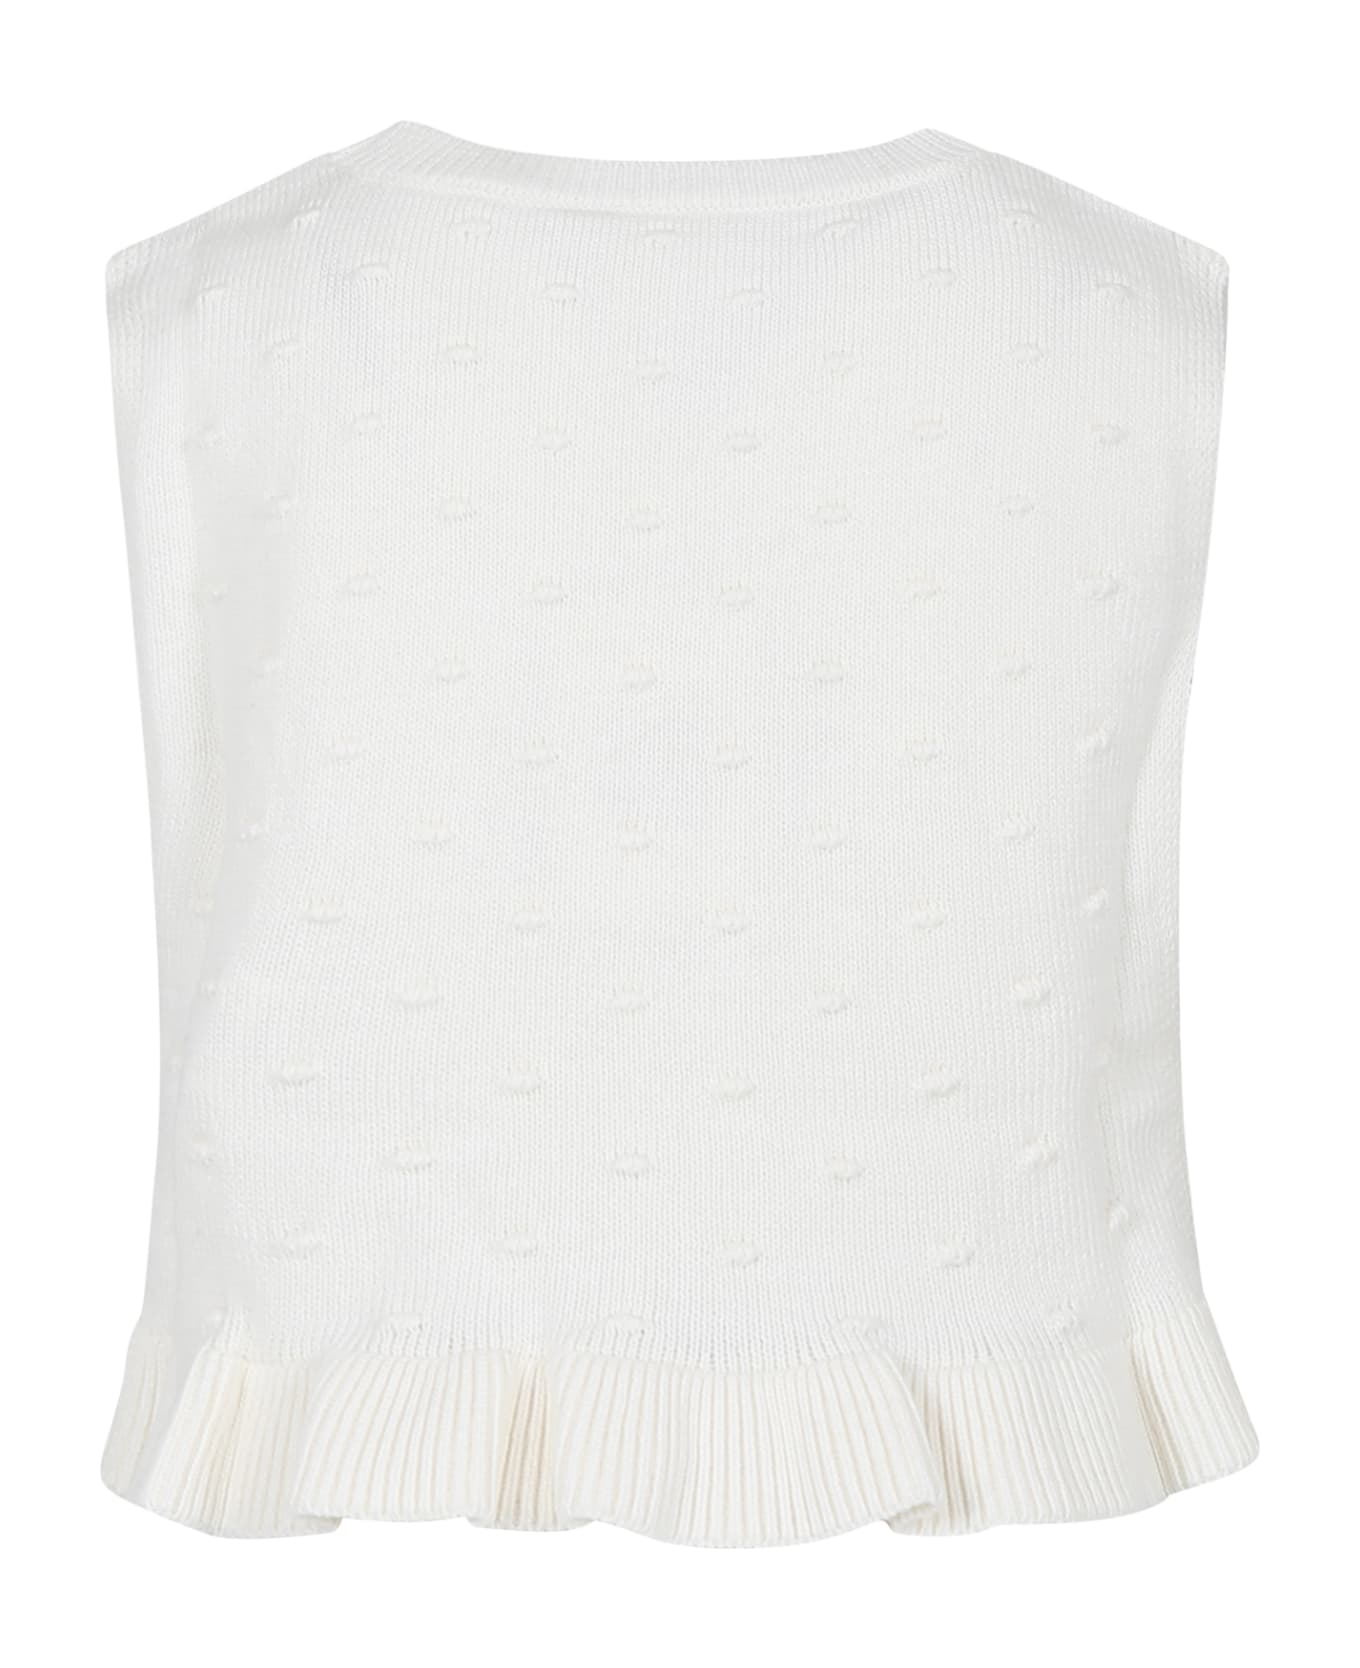 Caffe' d'Orzo White Top For Girl - White トップス